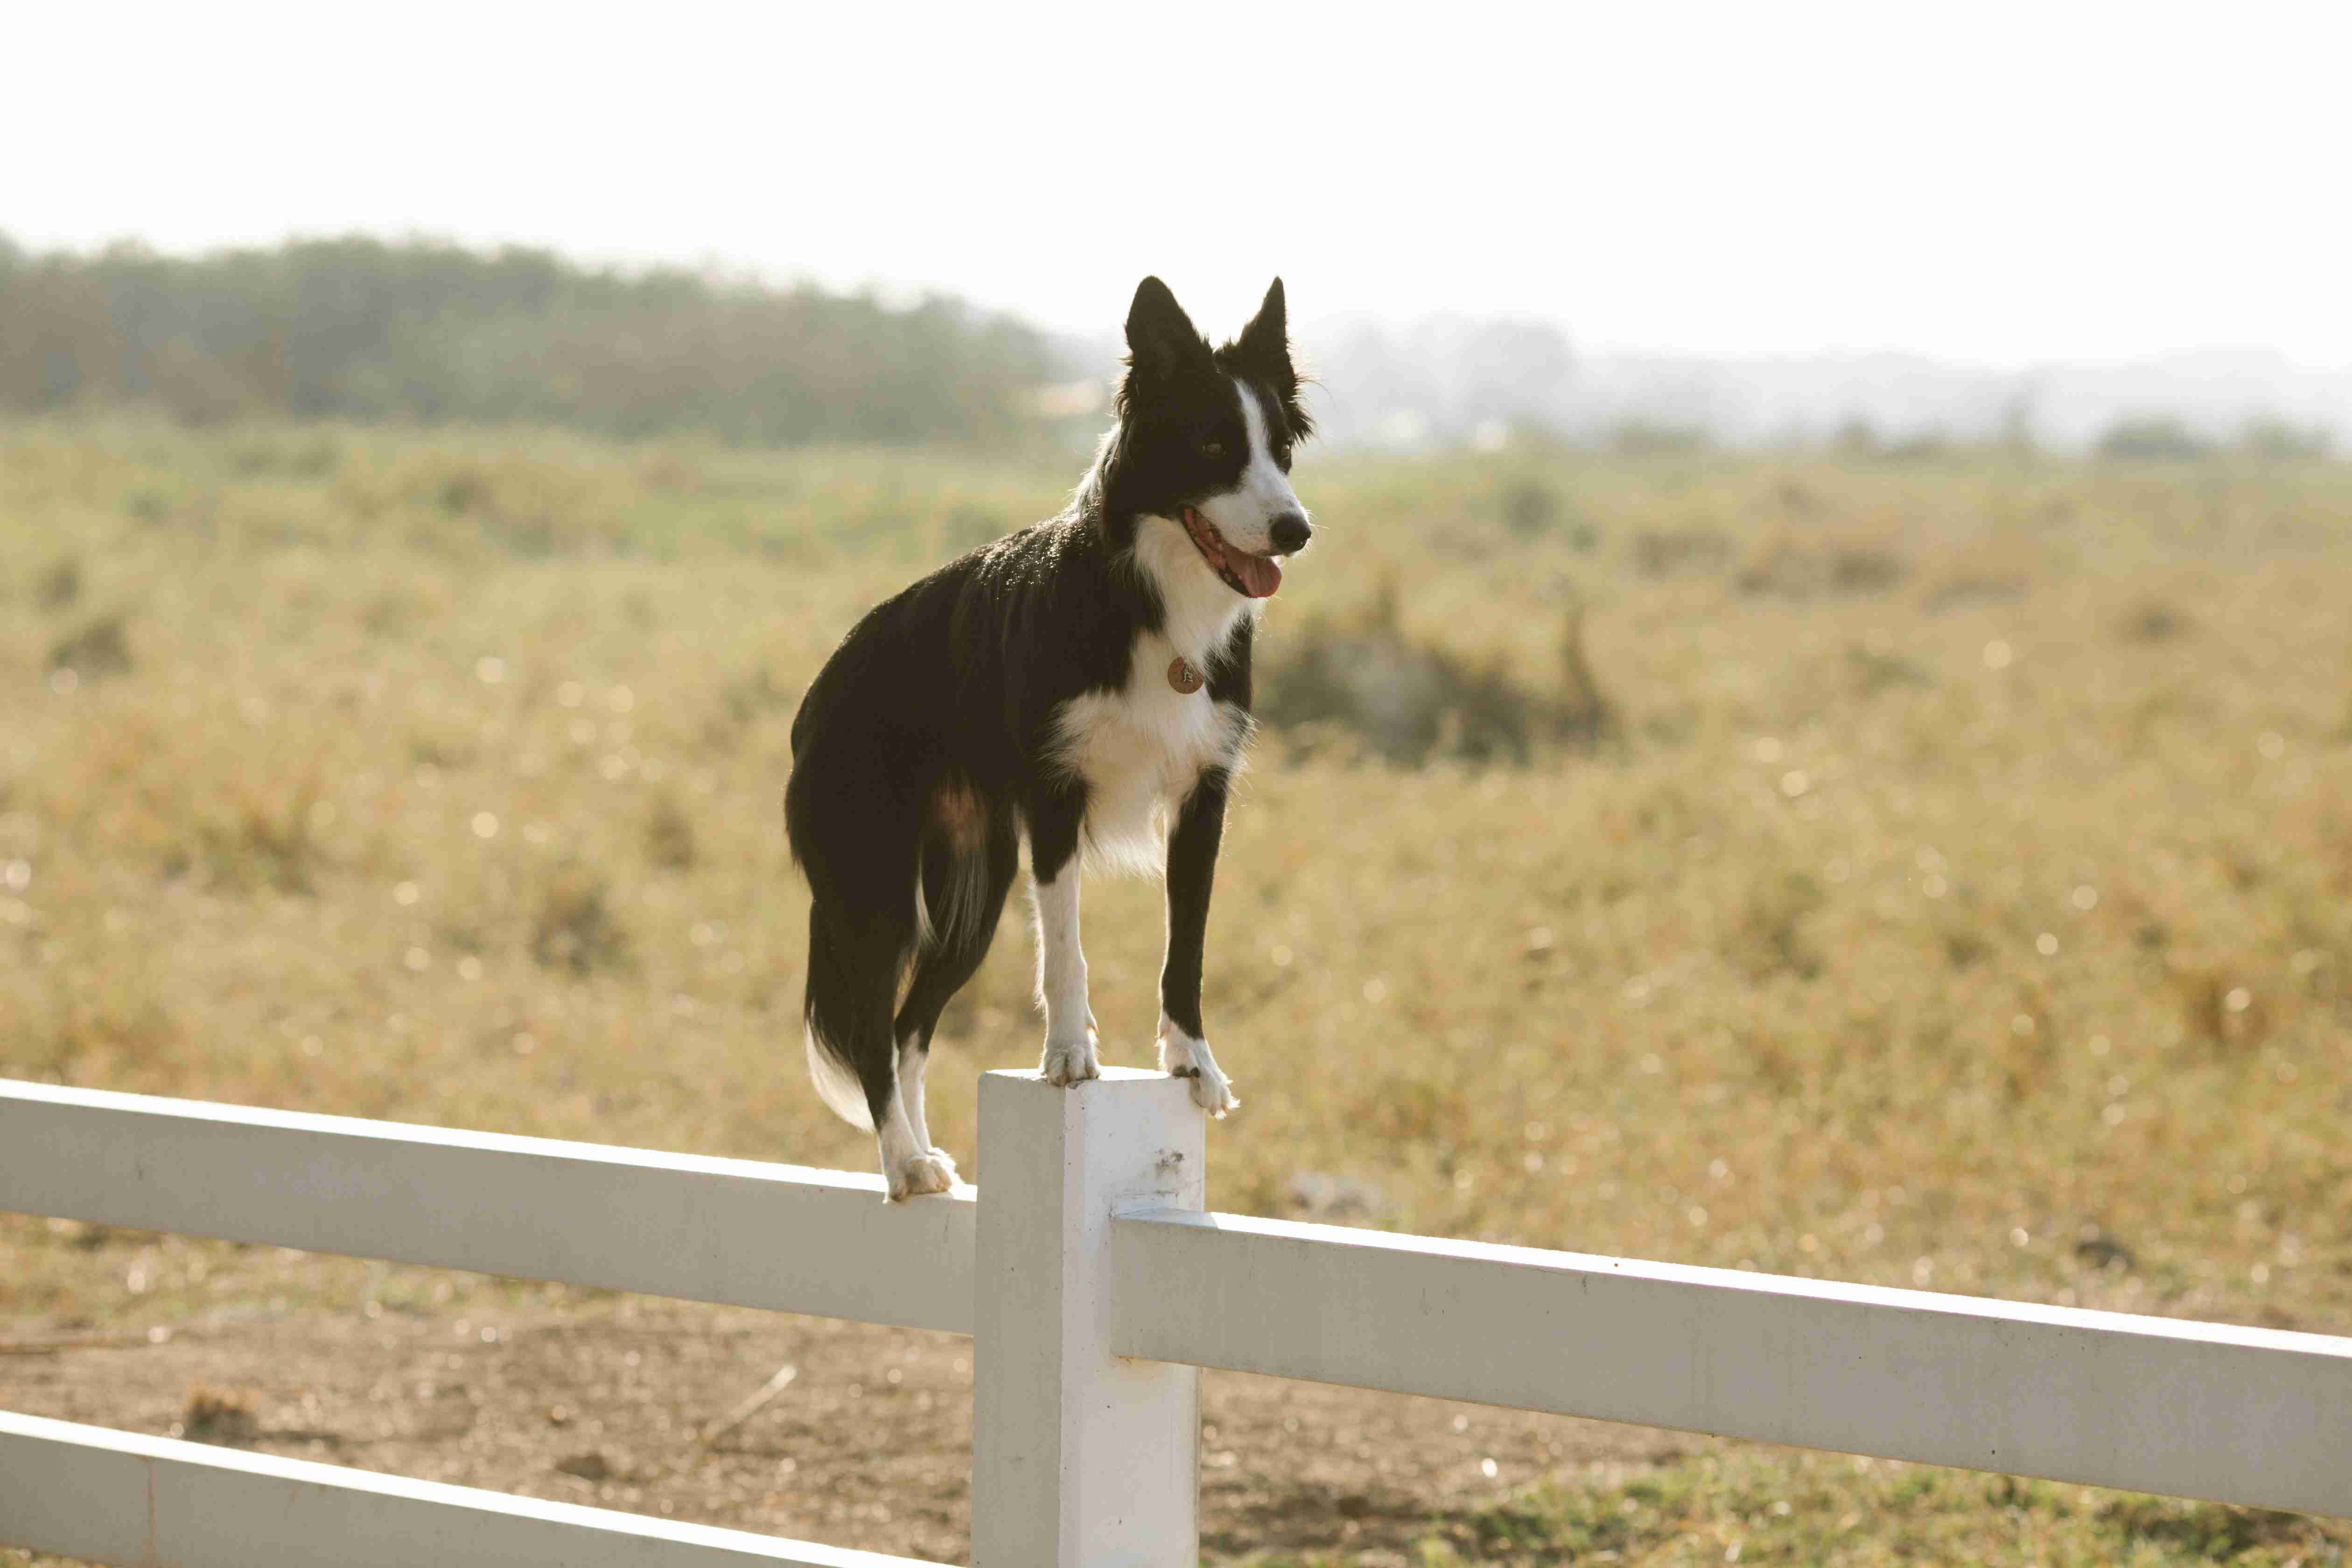 Border Collie Training: Tips for Teaching Proper Behavior around Children and Other Pets